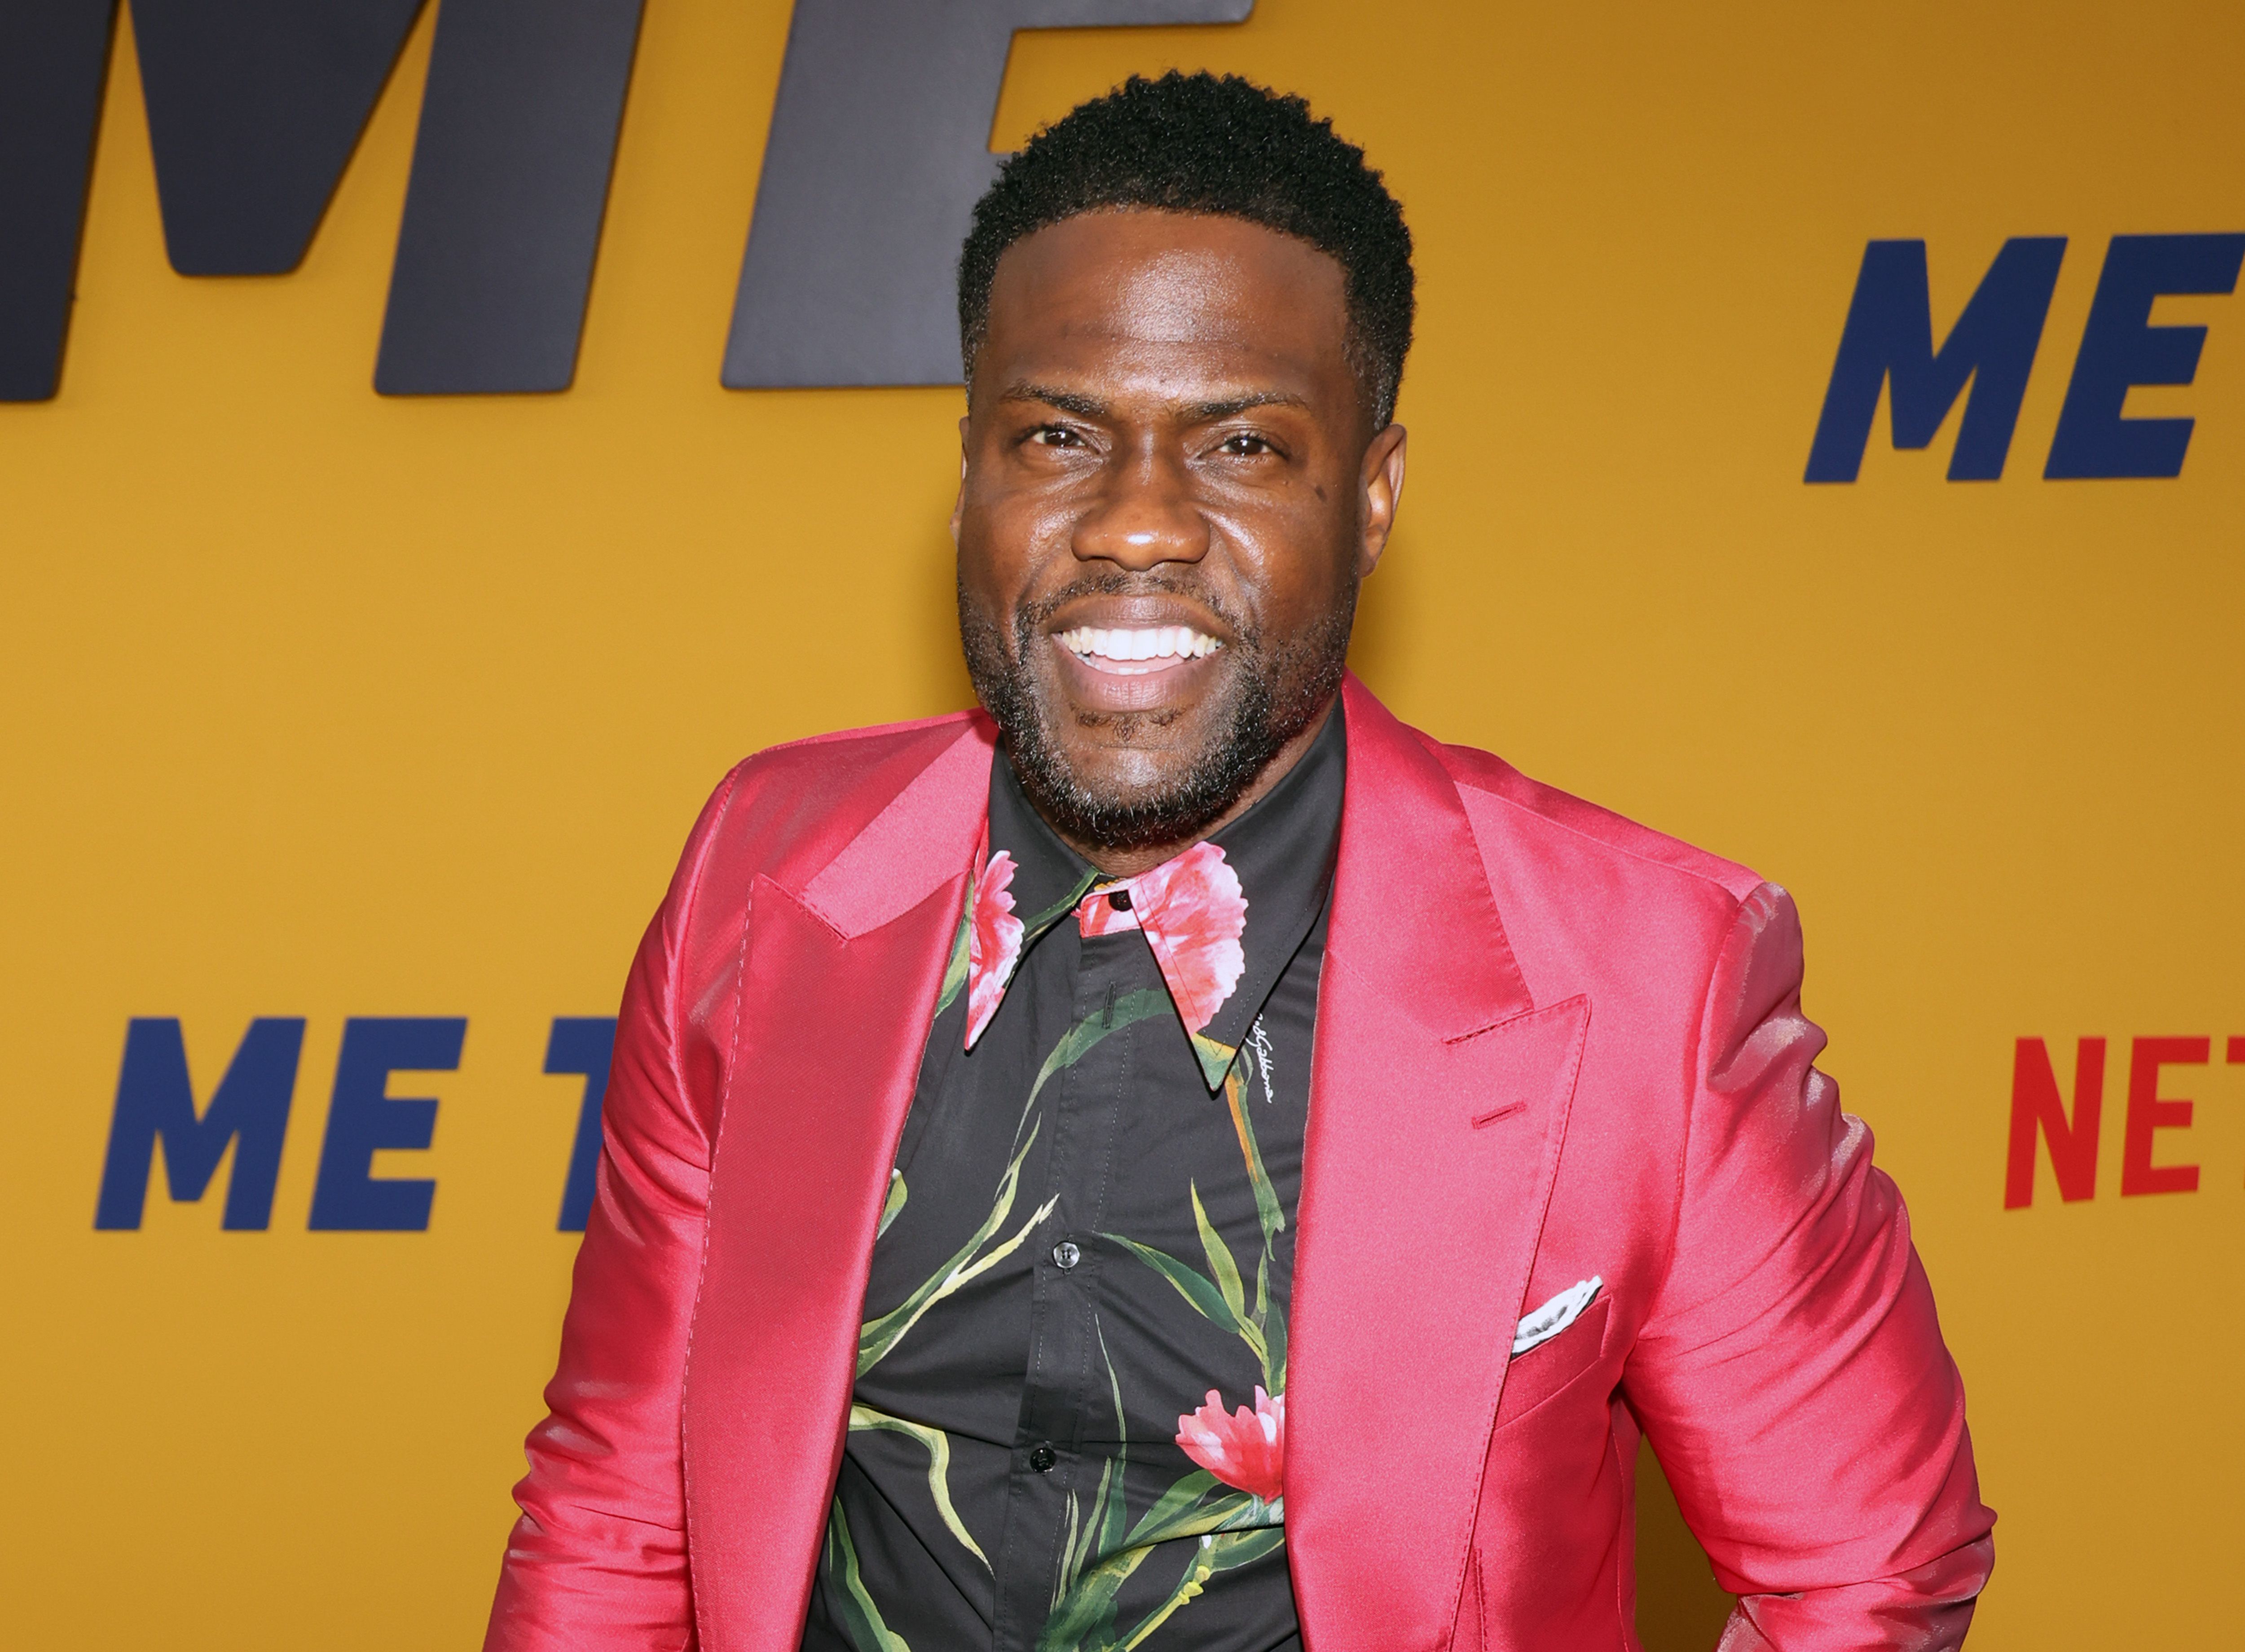 Kevin Hart smiling on the red carpet of the Los Angeles premiere of Netflix's 'Me Time'